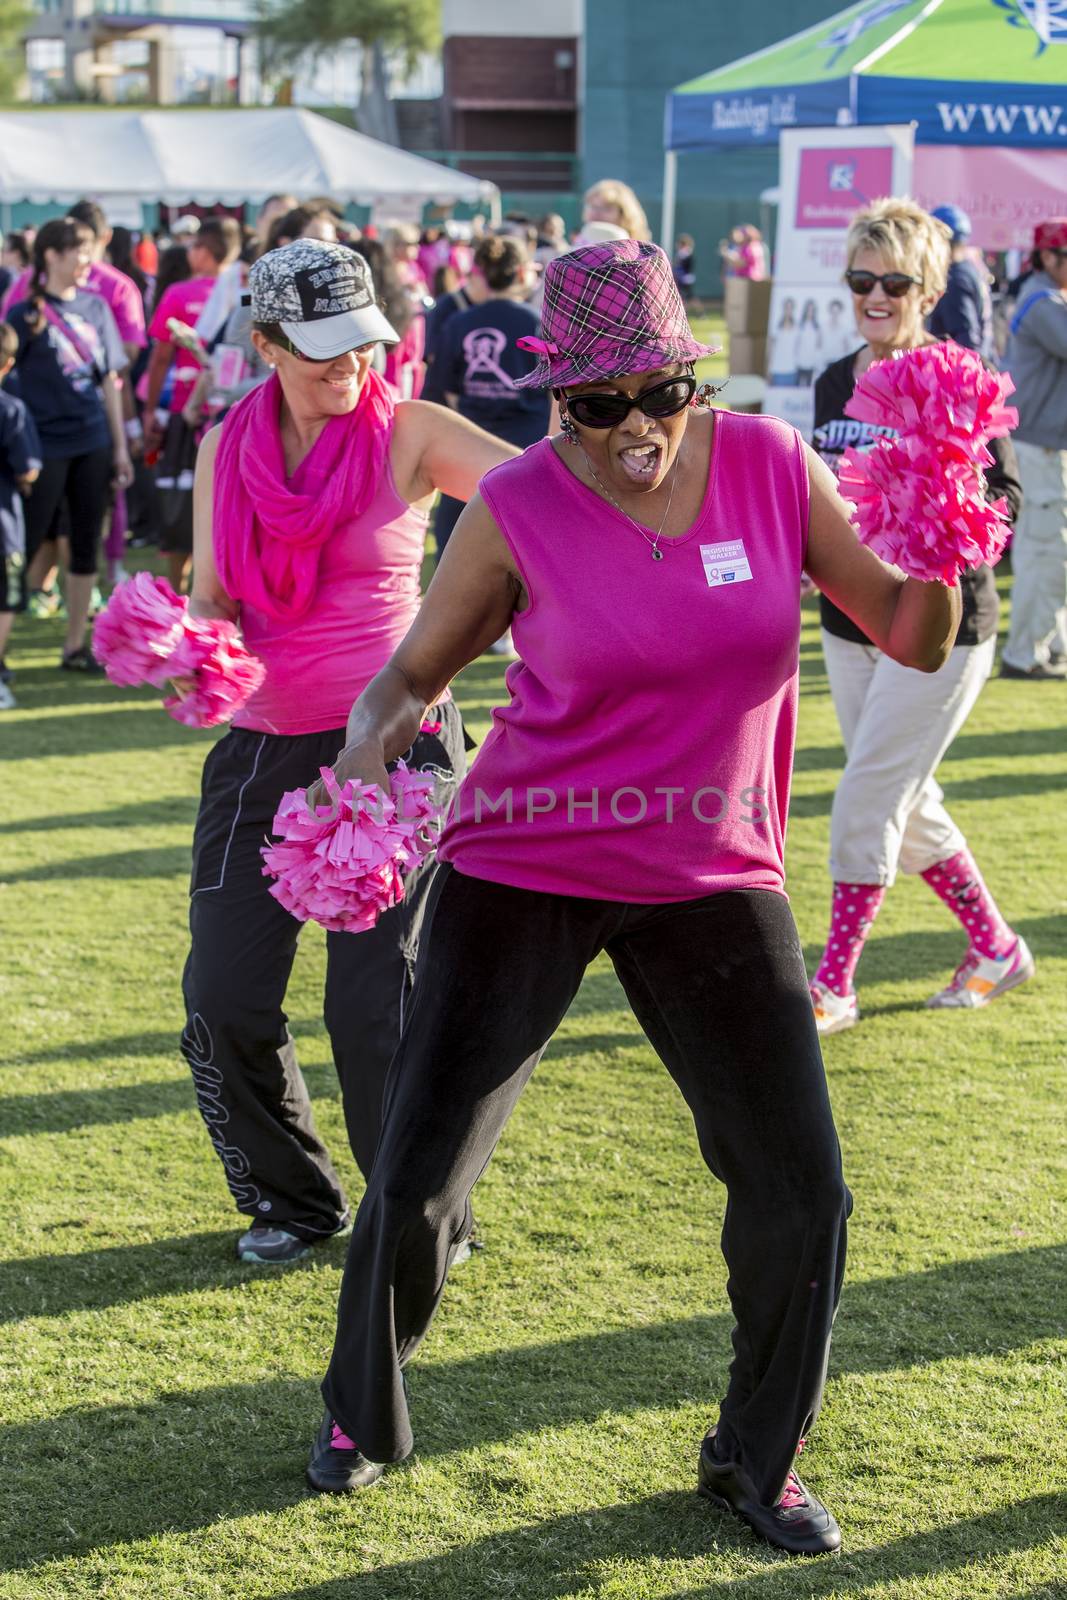 Women Dancing at Breast Cancer Awareness Event by Creatista